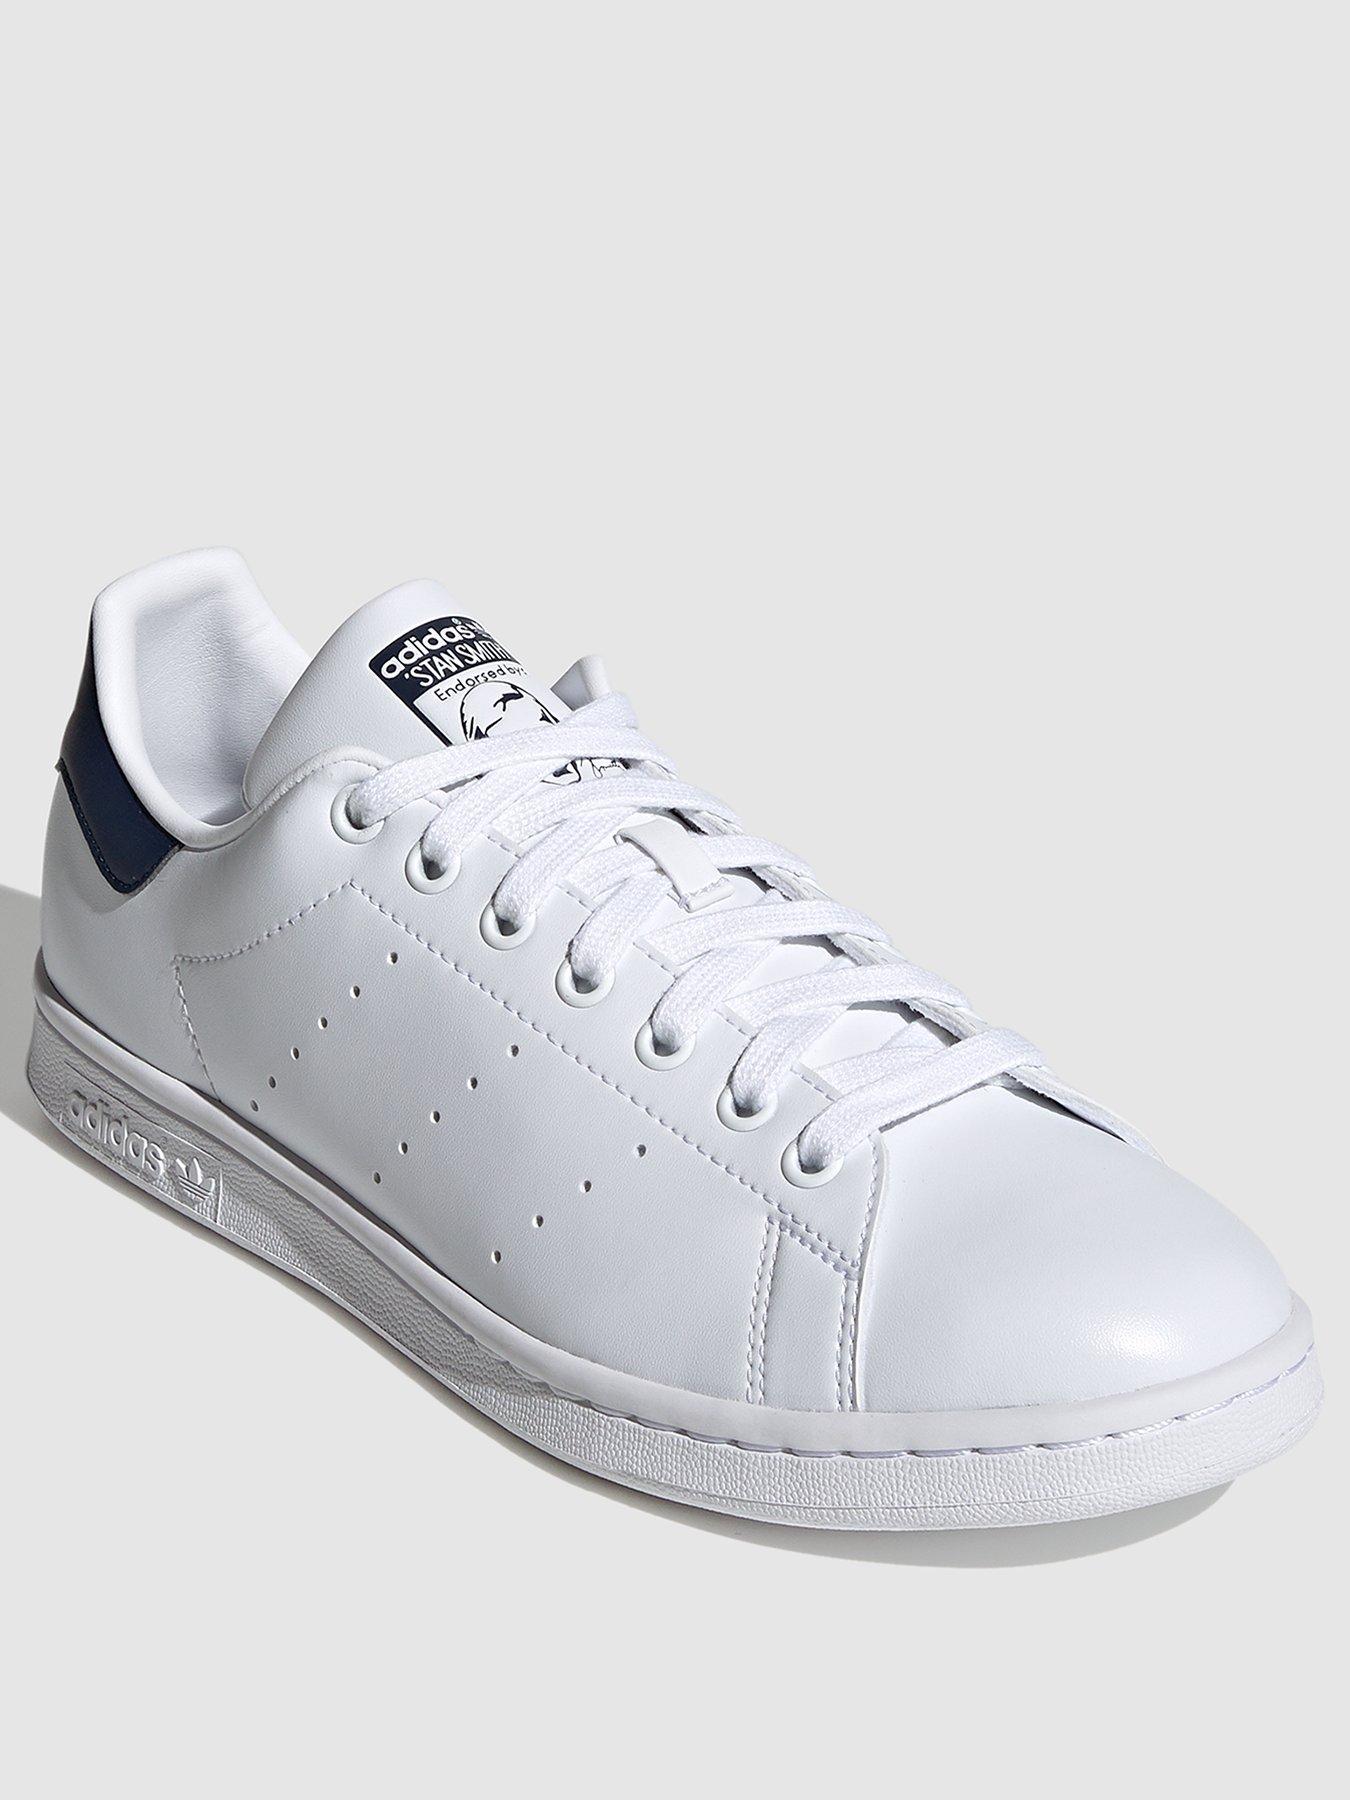 stan smith perforated trainer